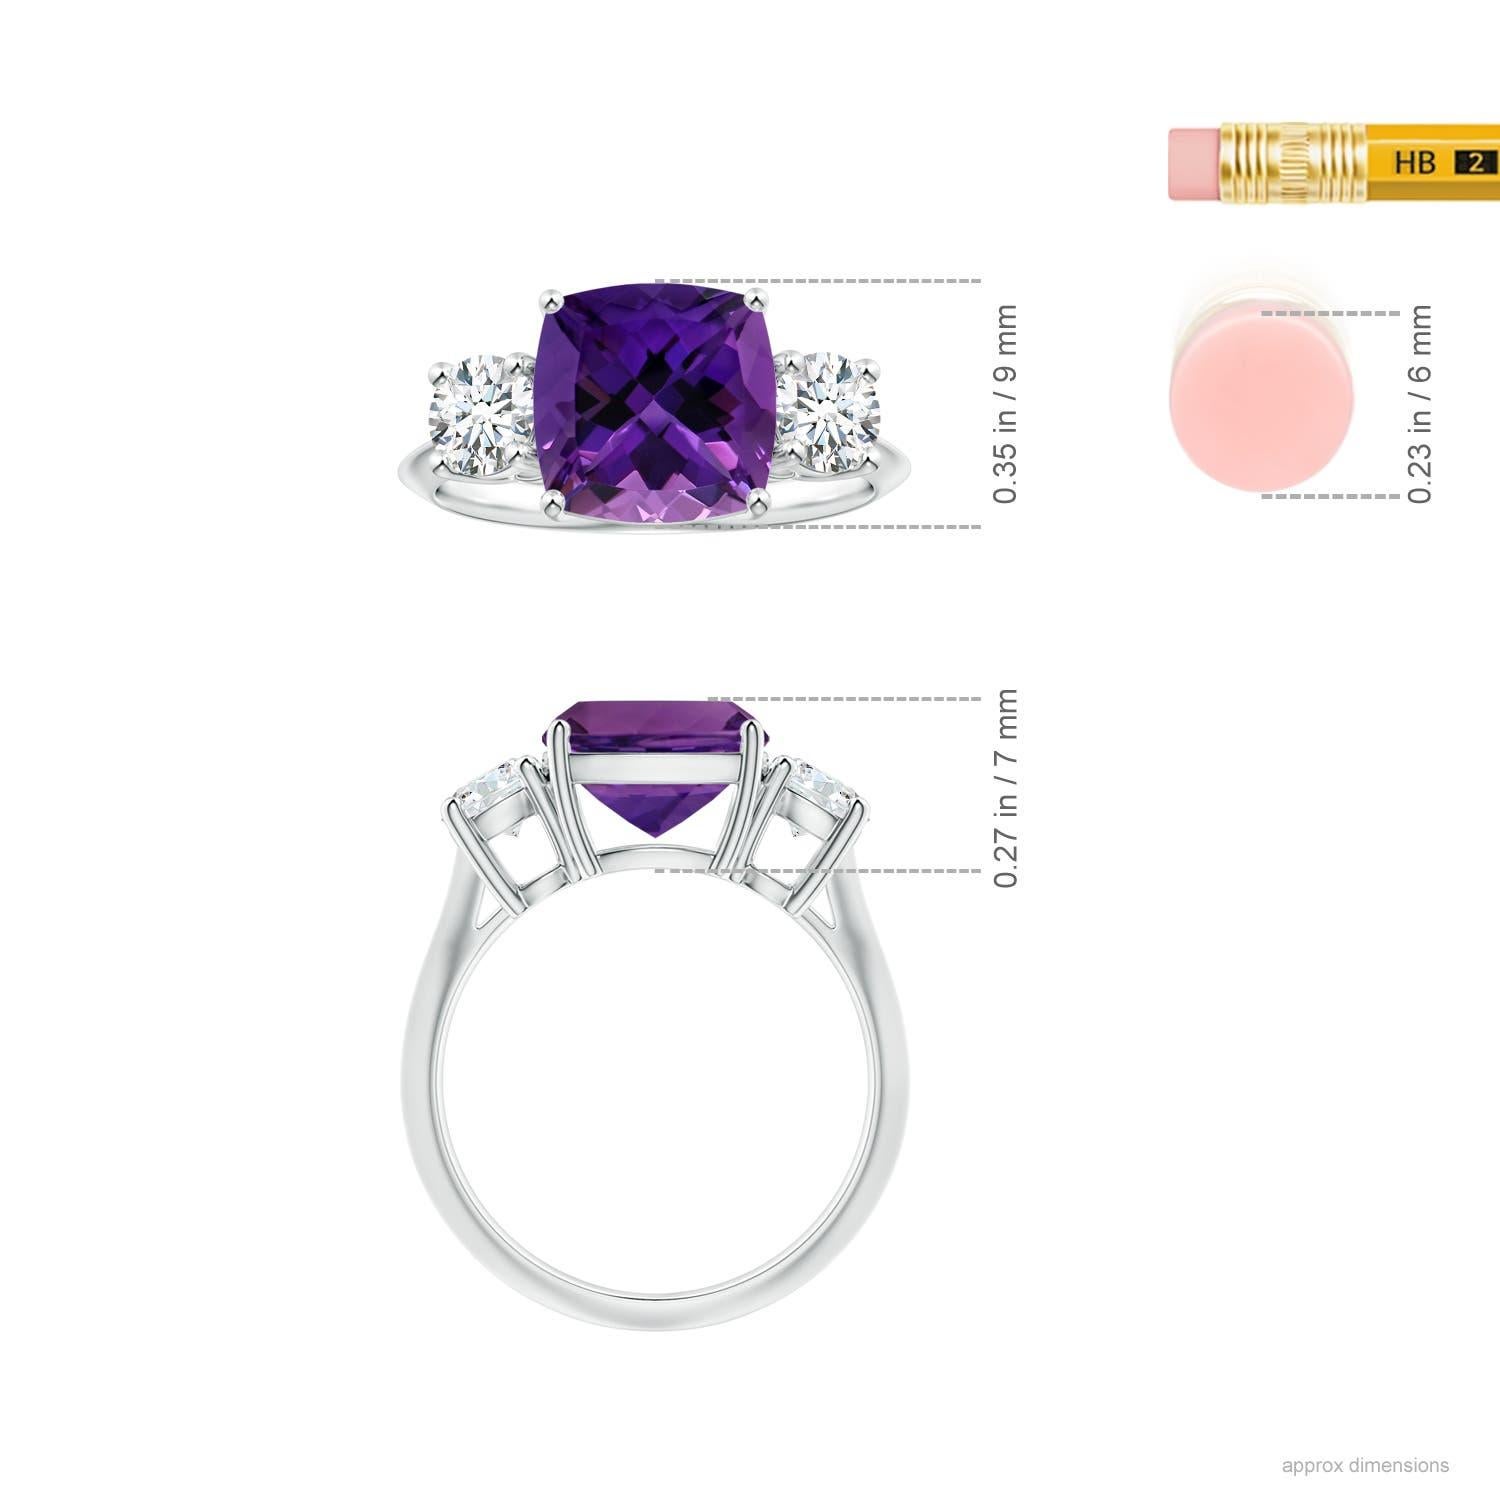 For Sale:  ANGARA 3-Stone GIA Certified Cushion Amethyst Ring in White Gold with Diamonds 5